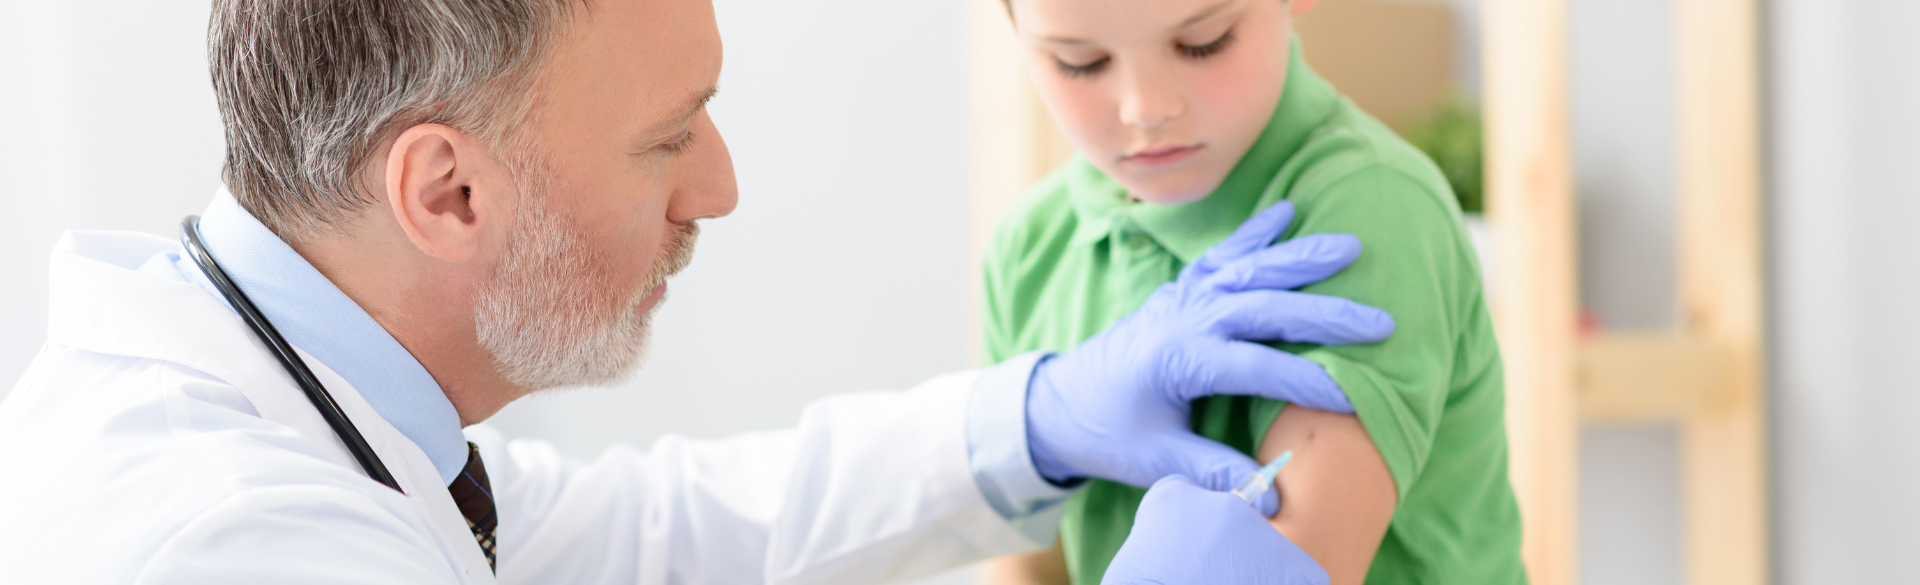 Most Parents Choose to Vaccinate Their Children, Say ACCORDS Researchers